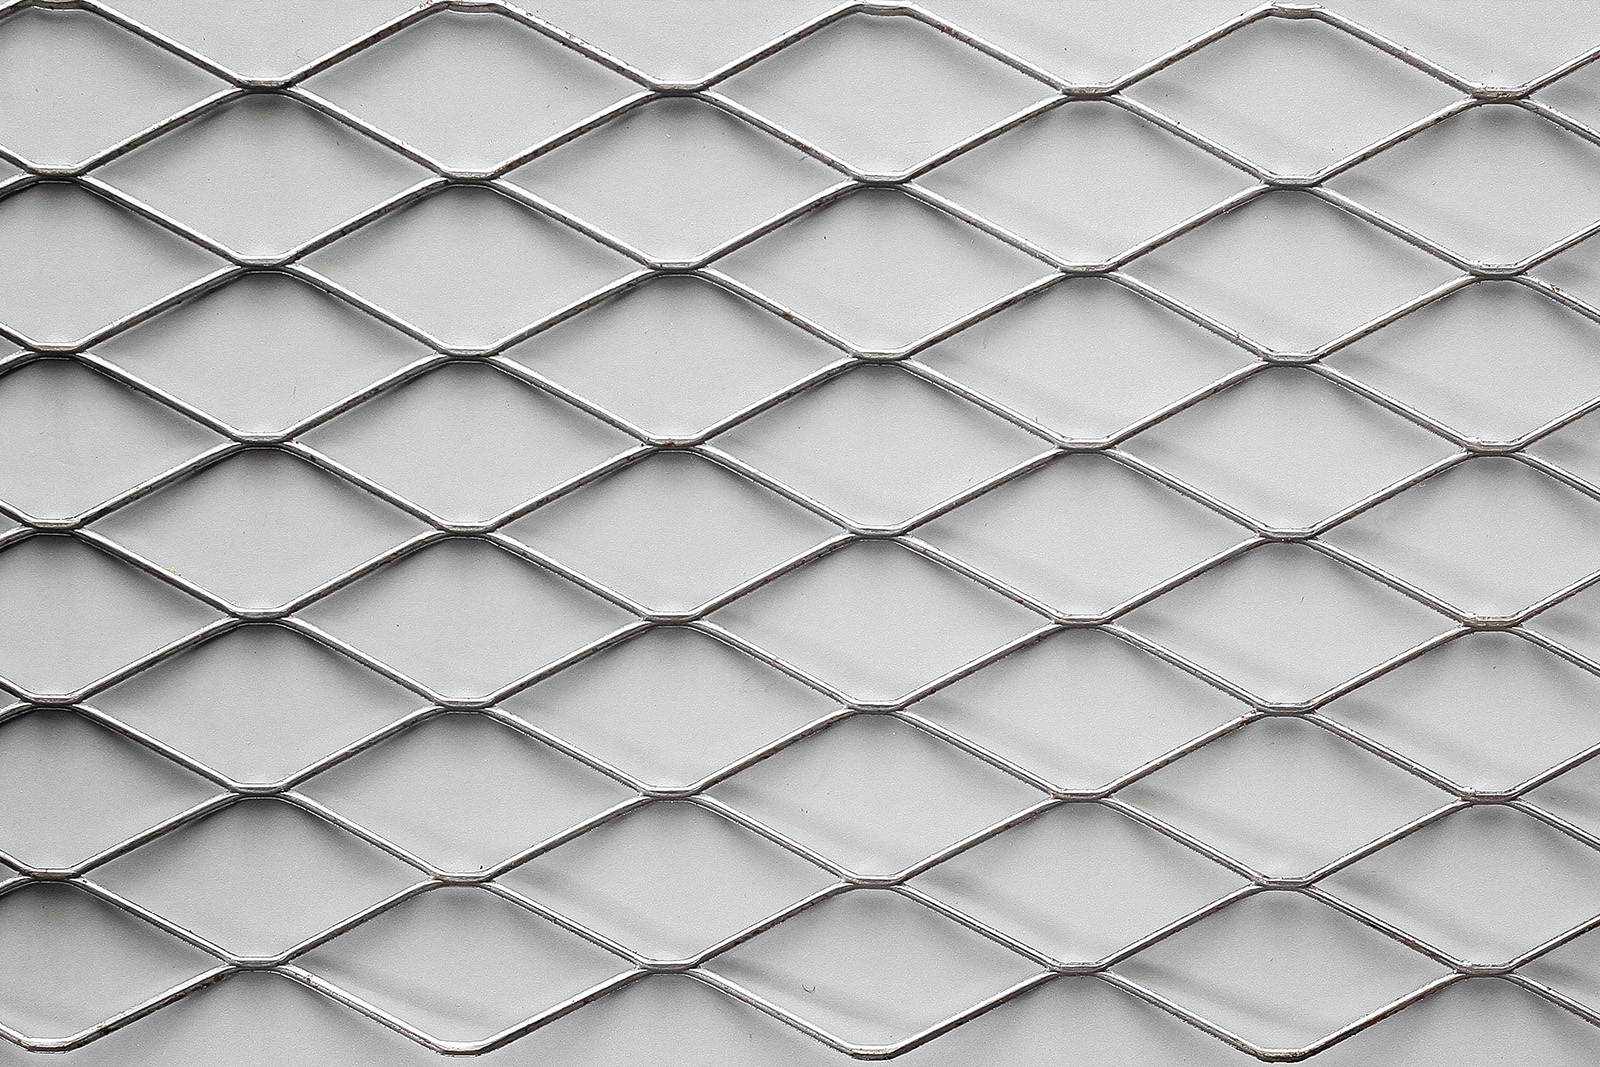 Expanded Metal Mesh Ceiling